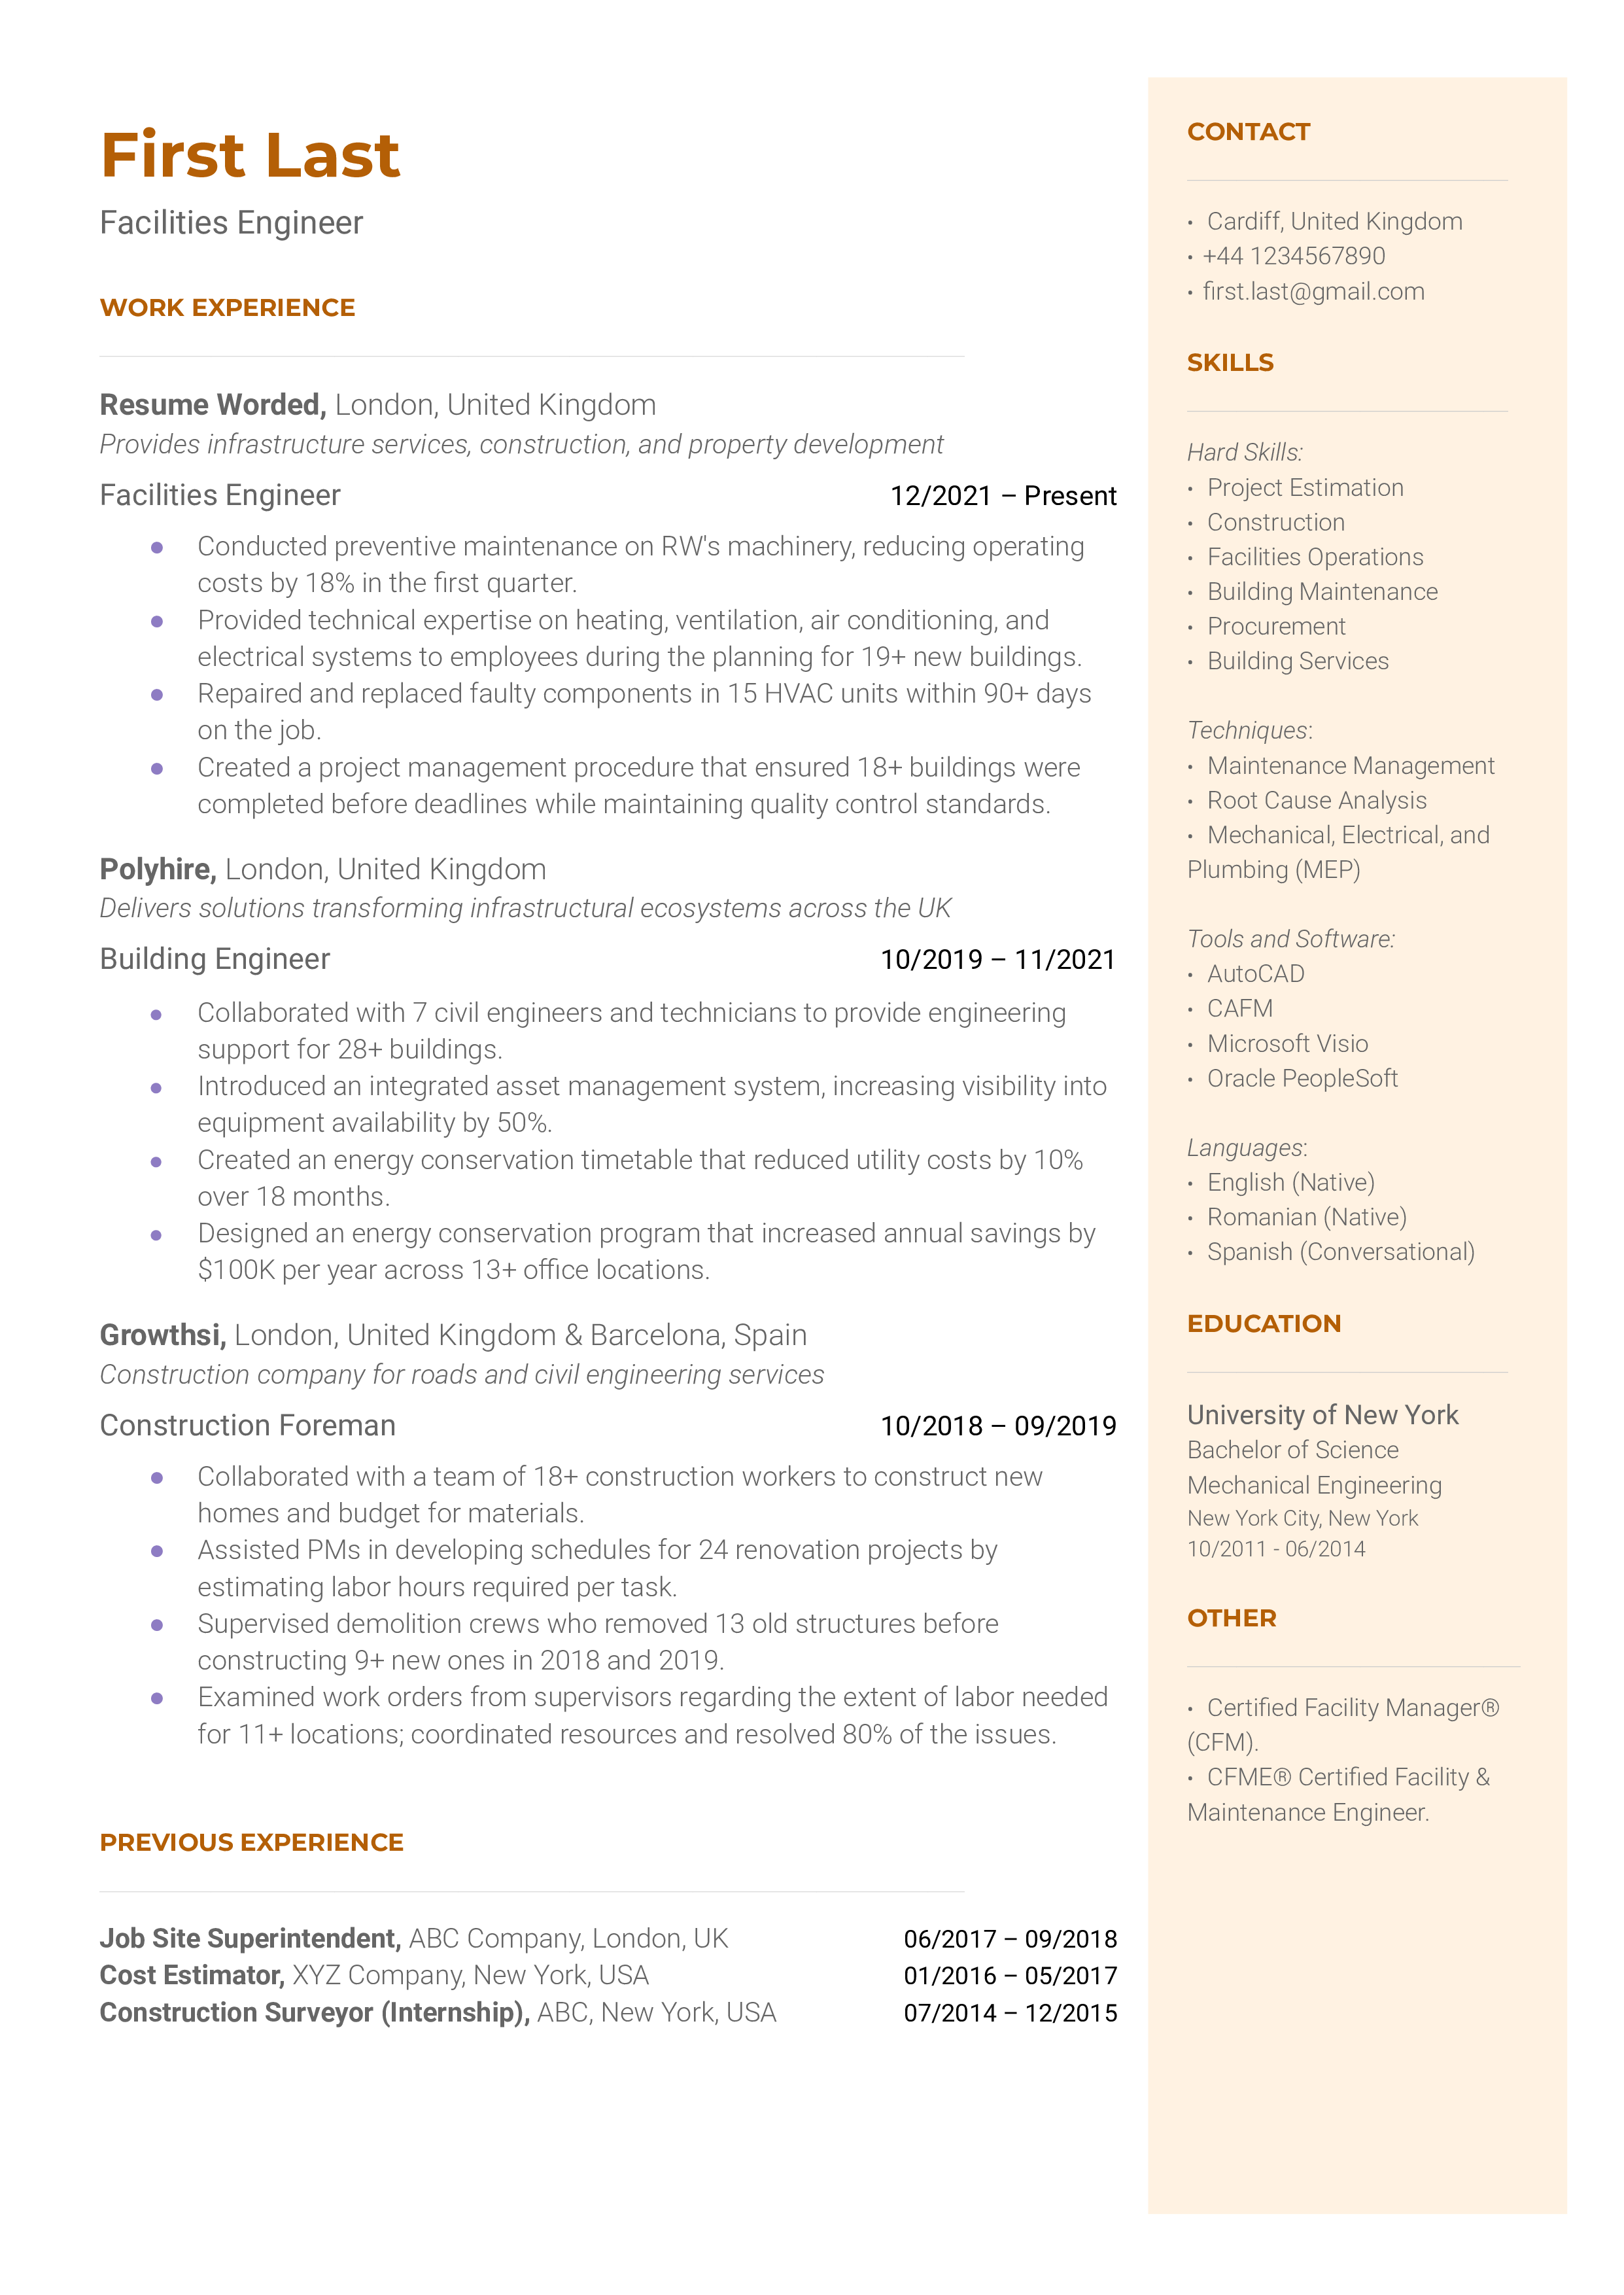 A facilities engineer resume sample that highlights the applicant’s career progression and engineering certifications.